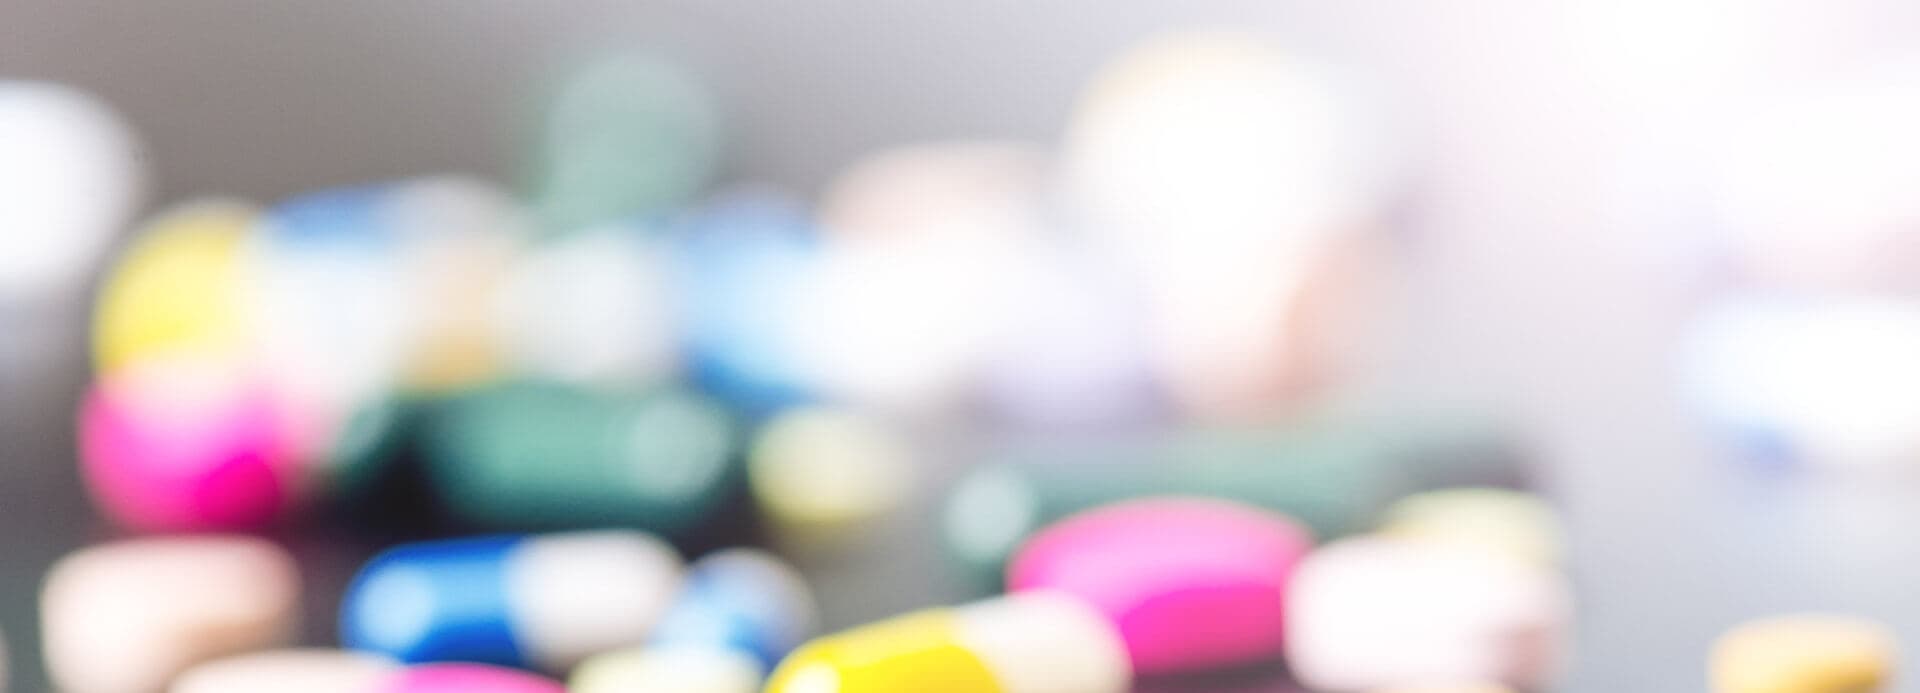 different kind of capsules background